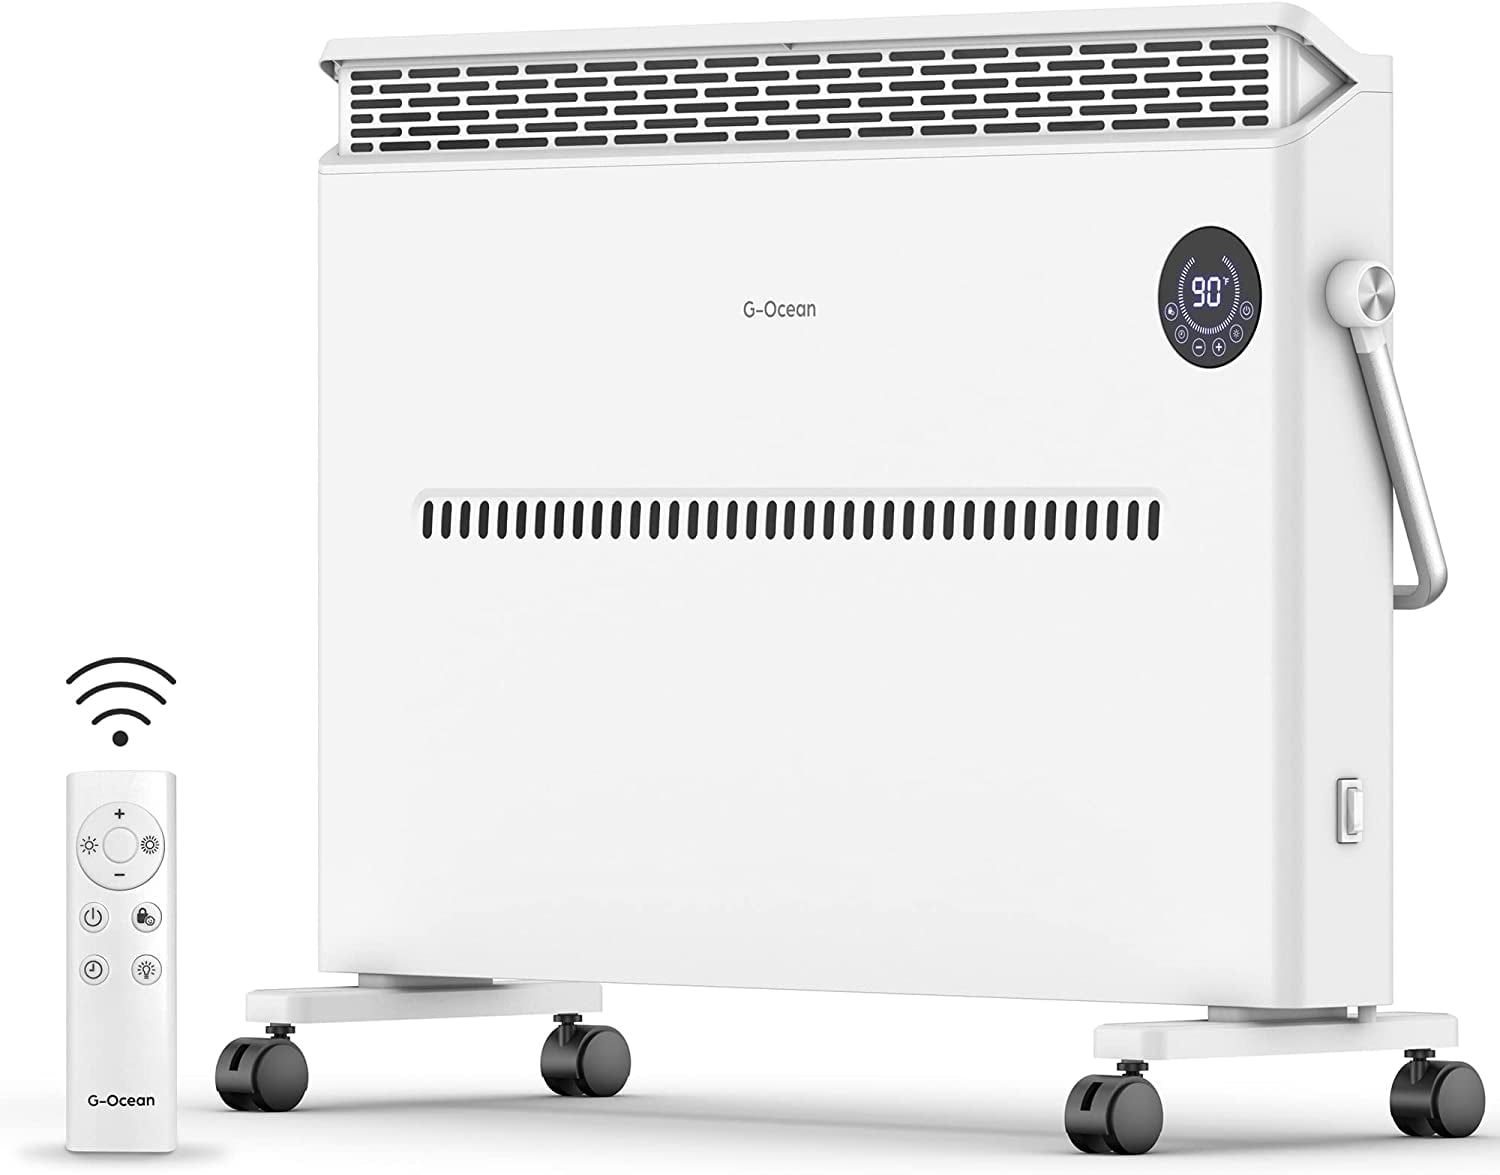 Govee Best Space Heater for Large Room - Coverage Up to 270 ft² - Quiet 80° Oscillation